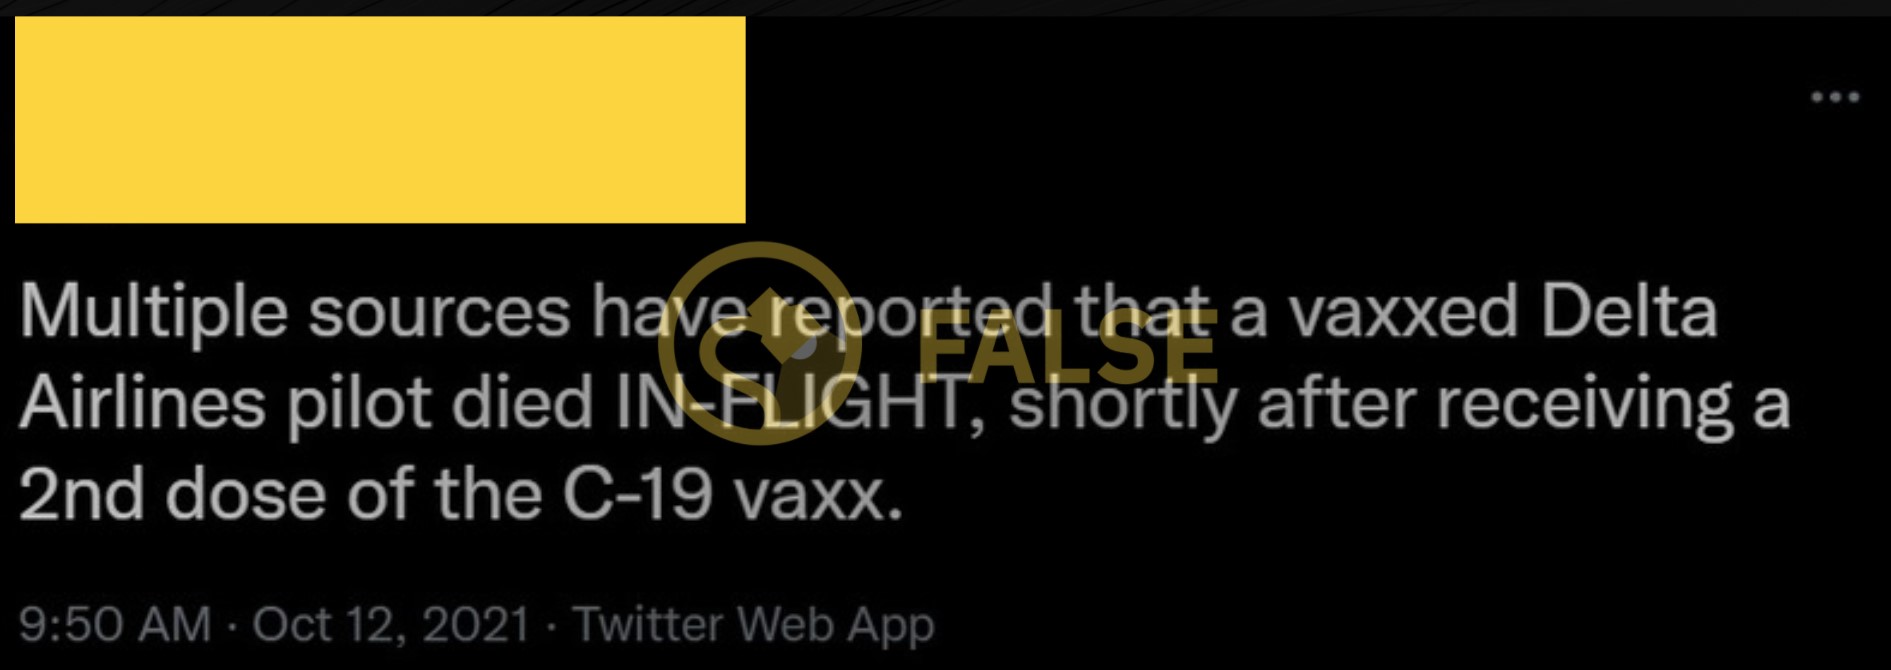 MEME: Multiple sources have reported that a vaxxed Delta Airlines pilot died IN-FLIGHT, shortly after receiving a 2nd dose of the C-19 vaxx.